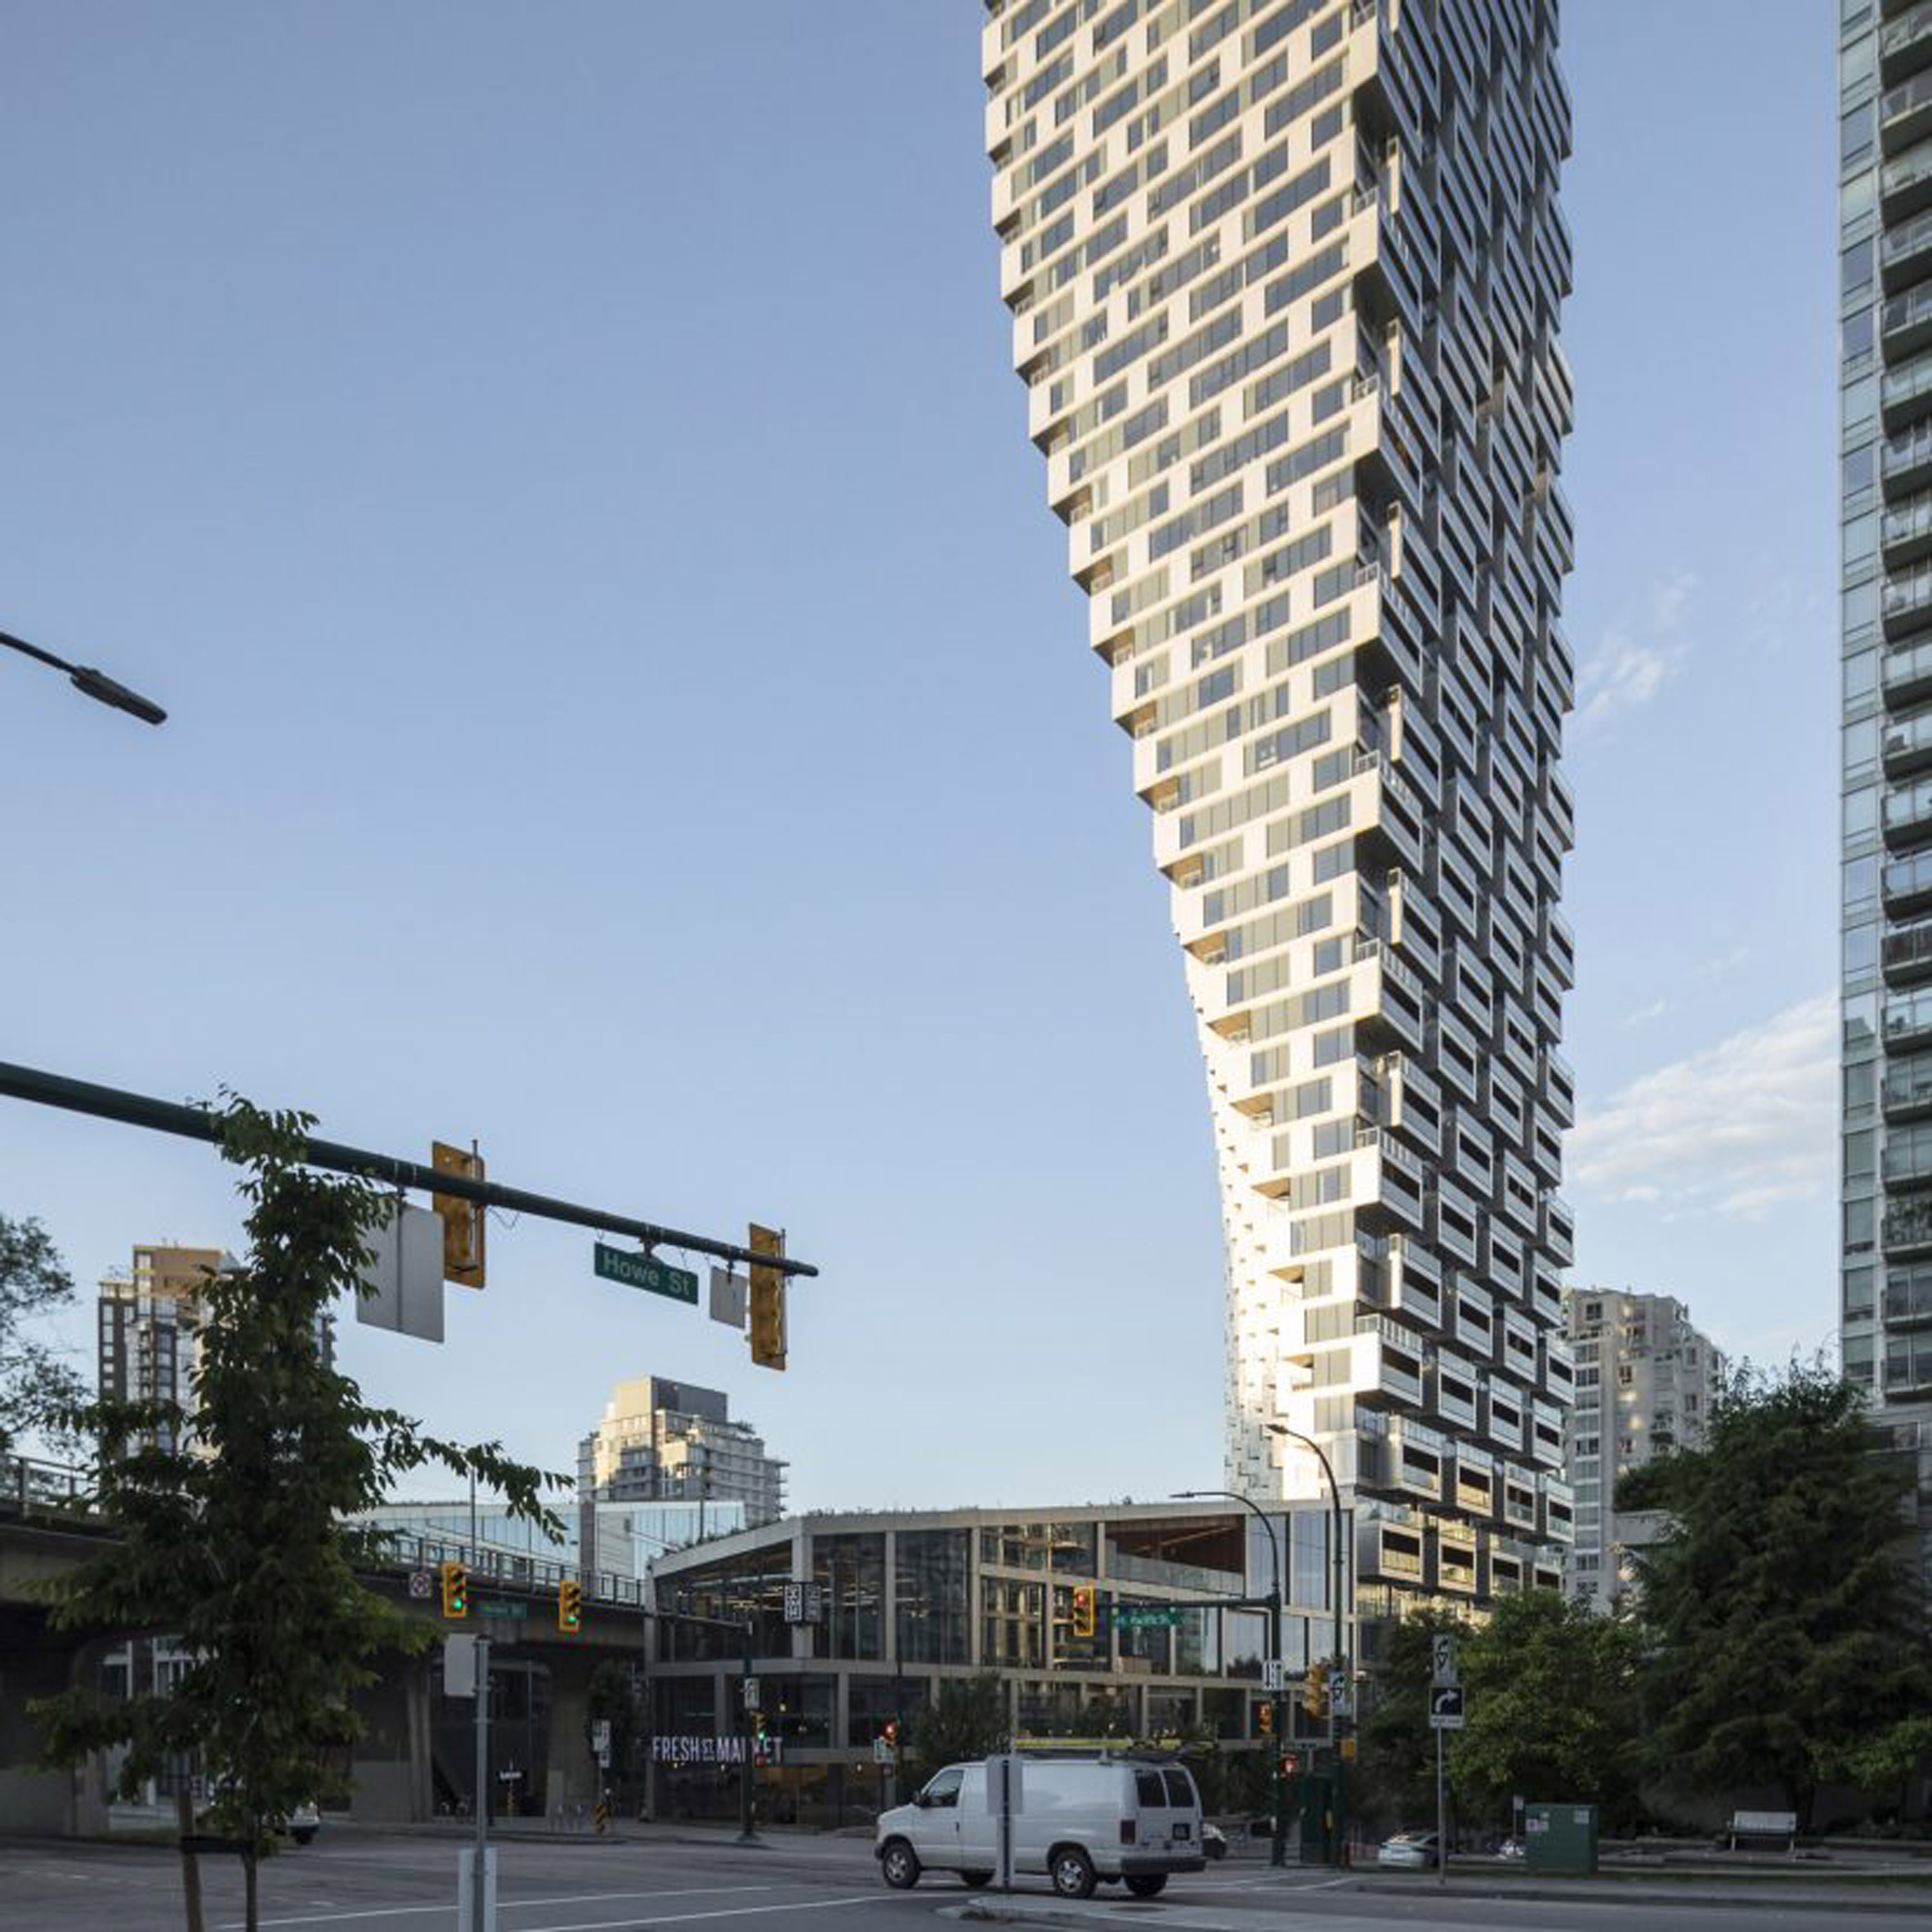 Vancouver House, Vancouver, Canada, by BIG